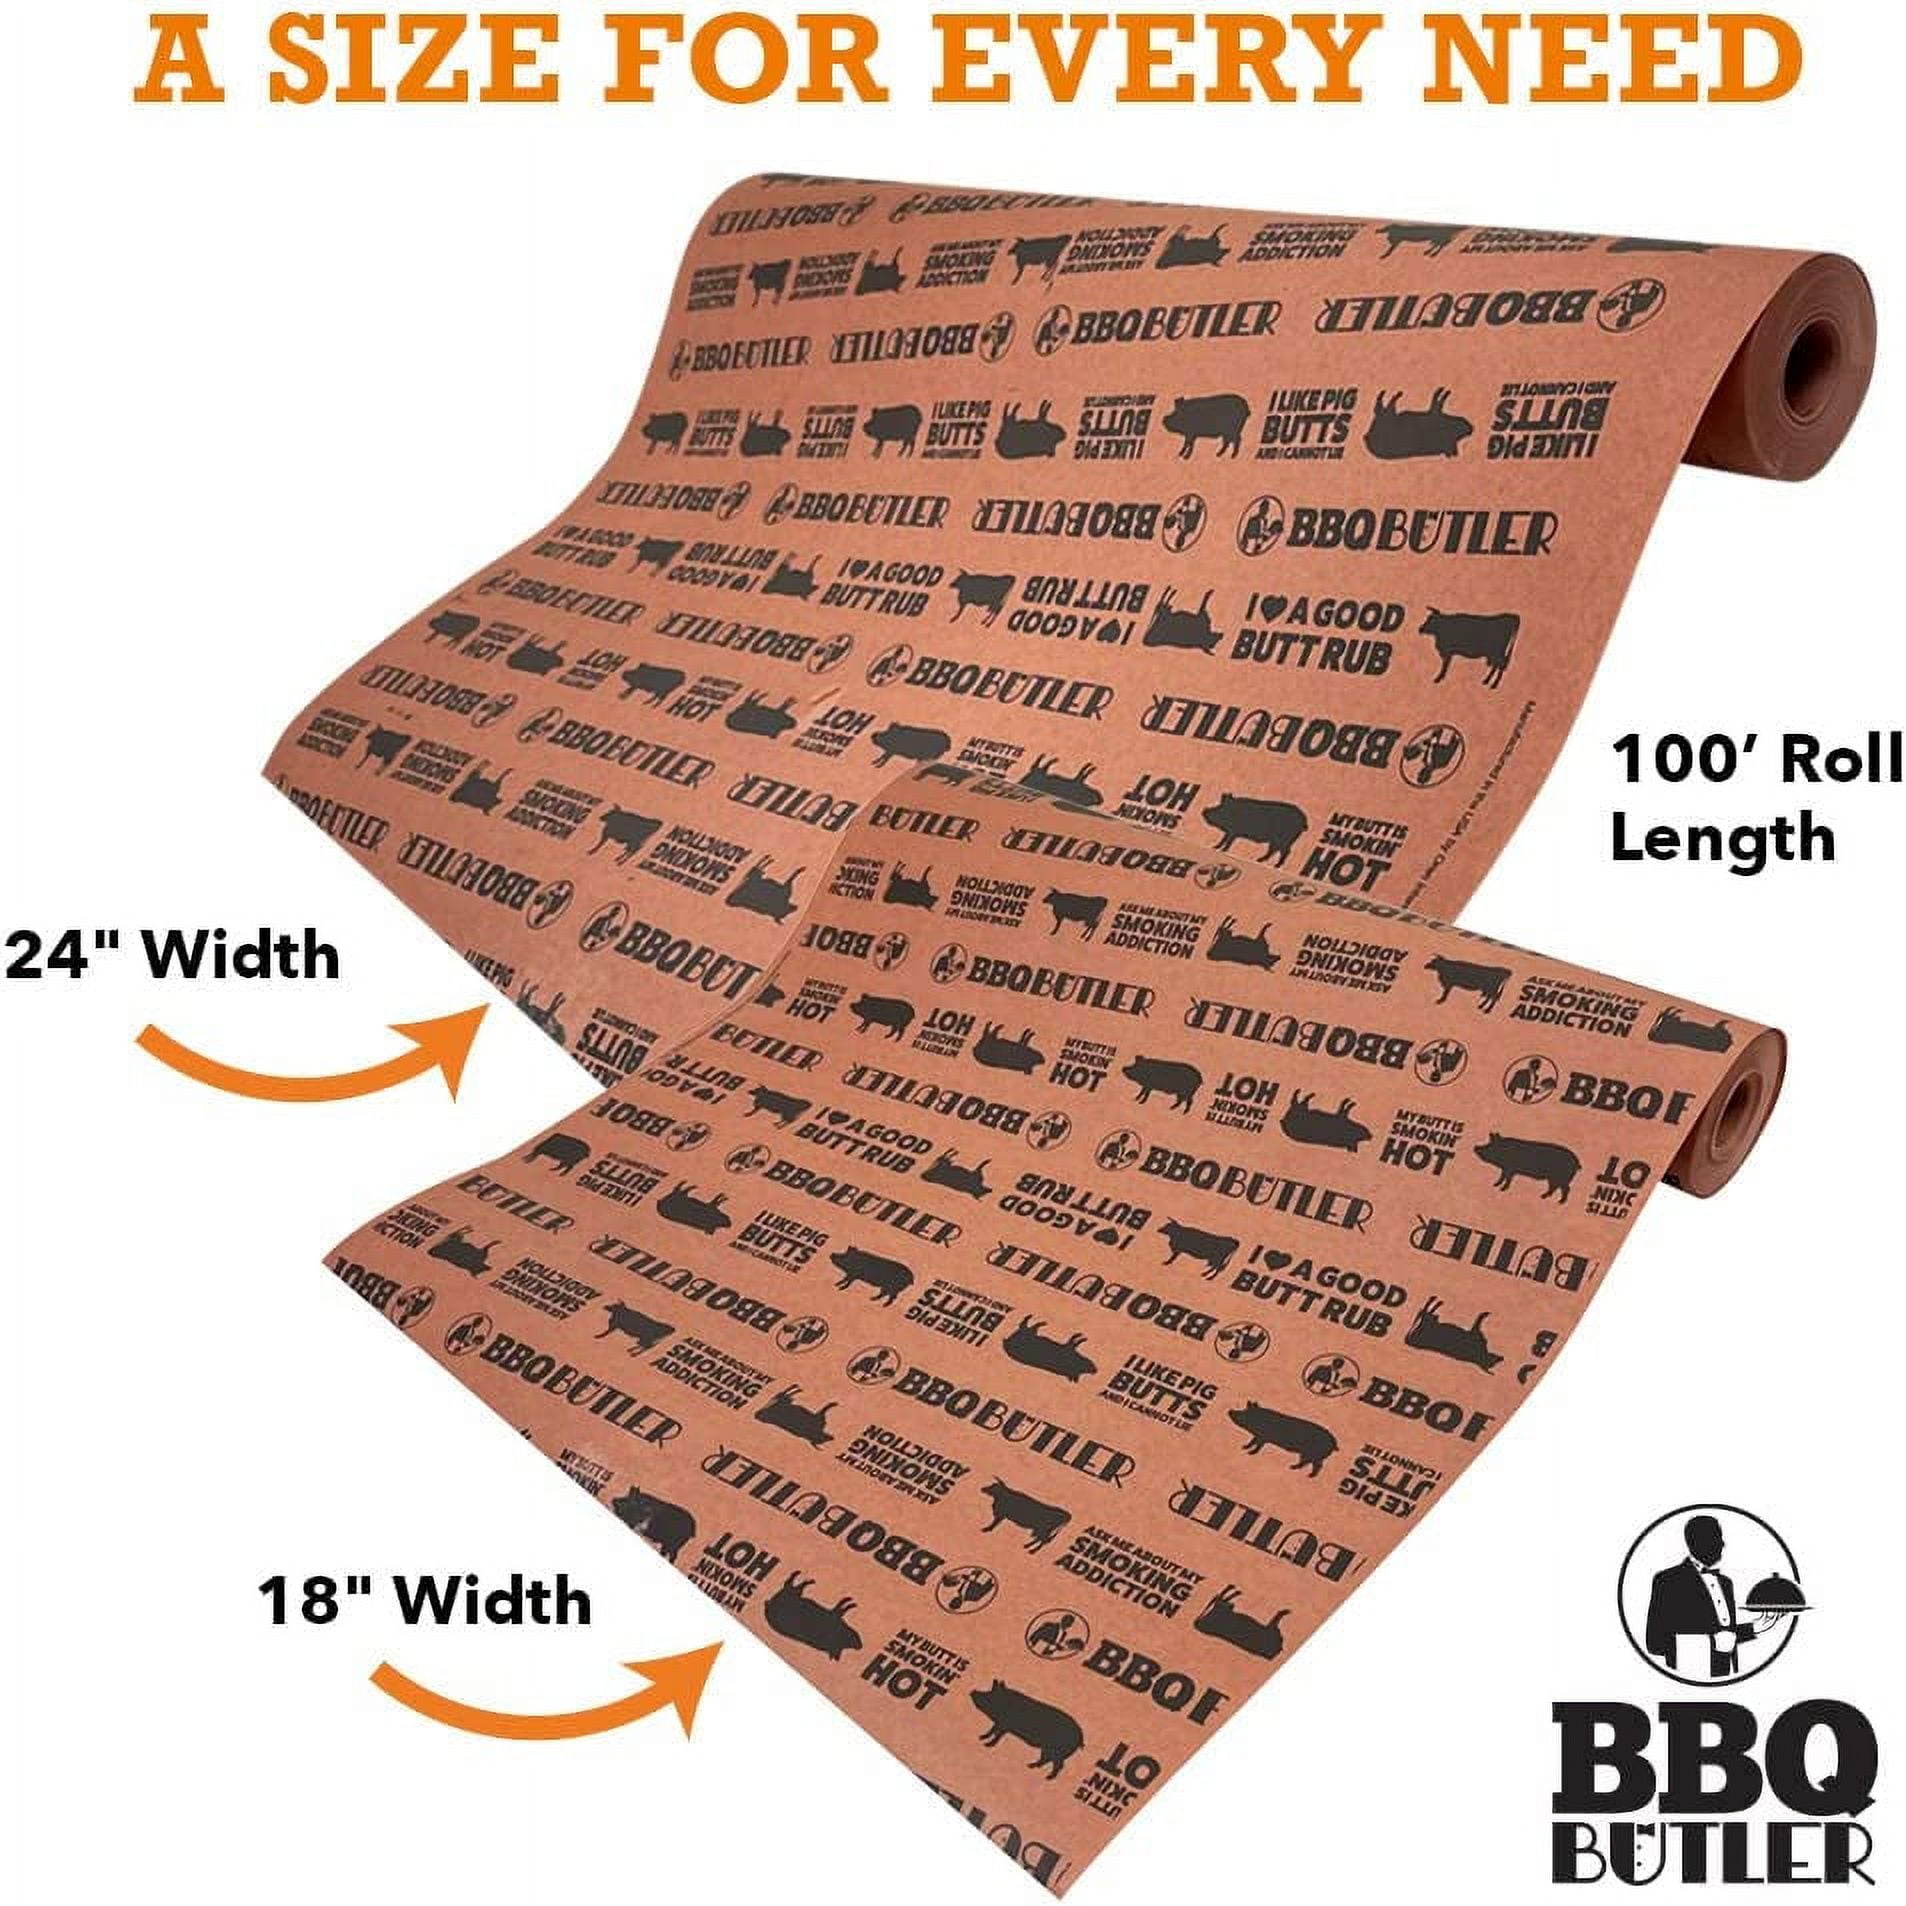 Udareit Butcher Paper for Smoking Meat Pink Butcher Paper Roll Unwaxed 12 inch x 60 Feet, BBQ Peach Wrapping Paper for Smoking Meat, Brisket, Crawfish